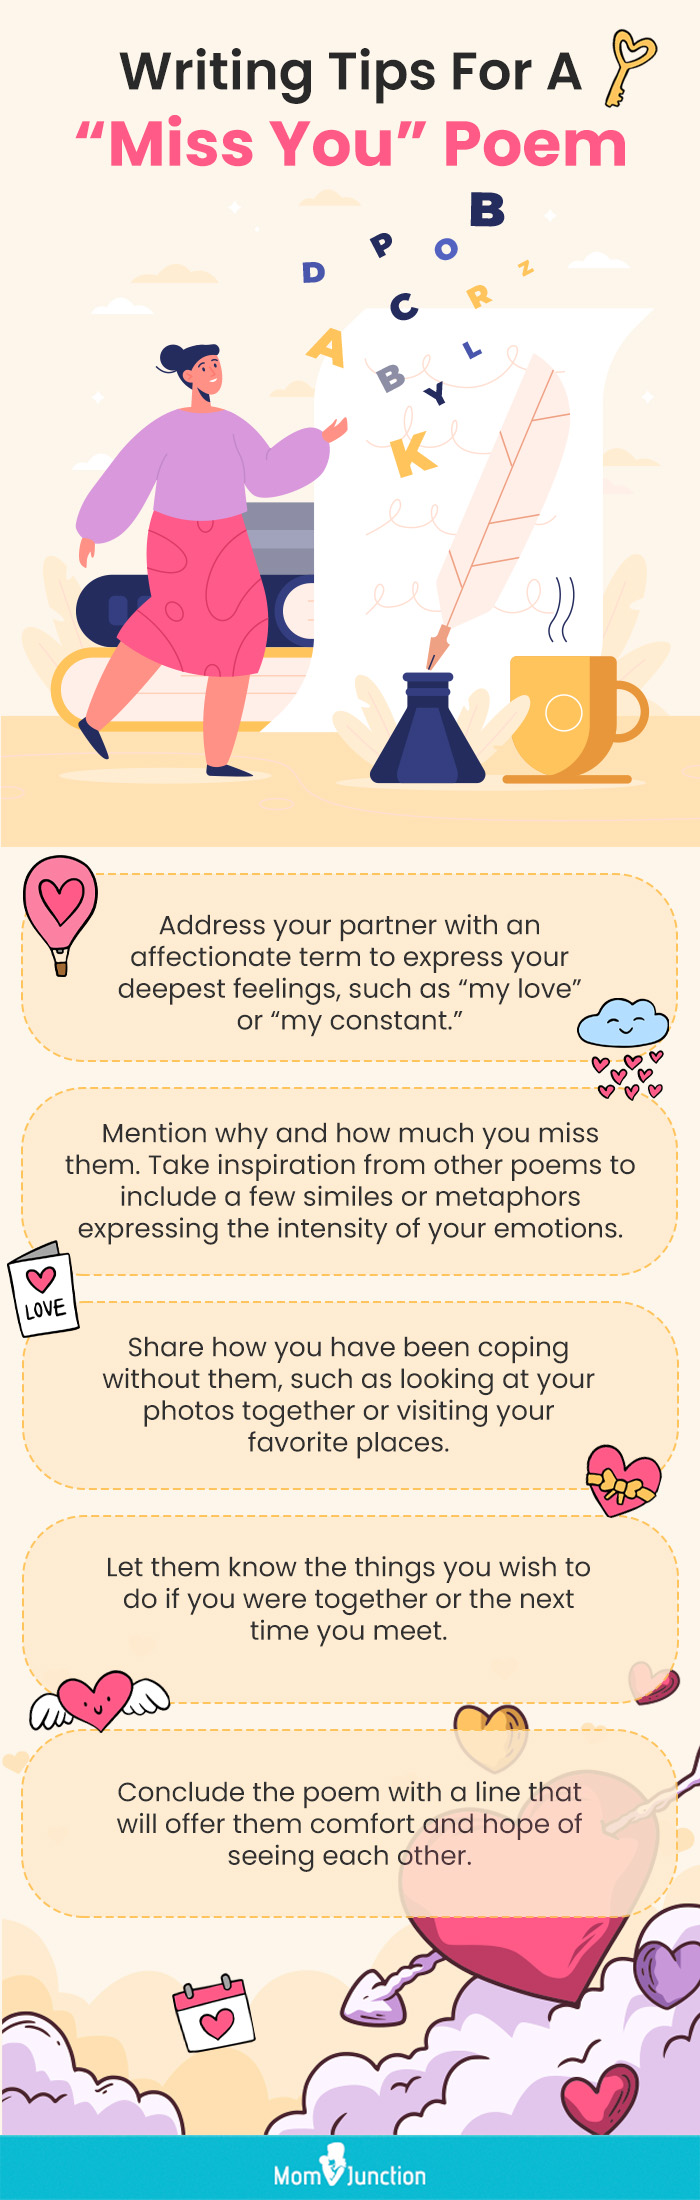 writing tips for a miss you poem (infographic)